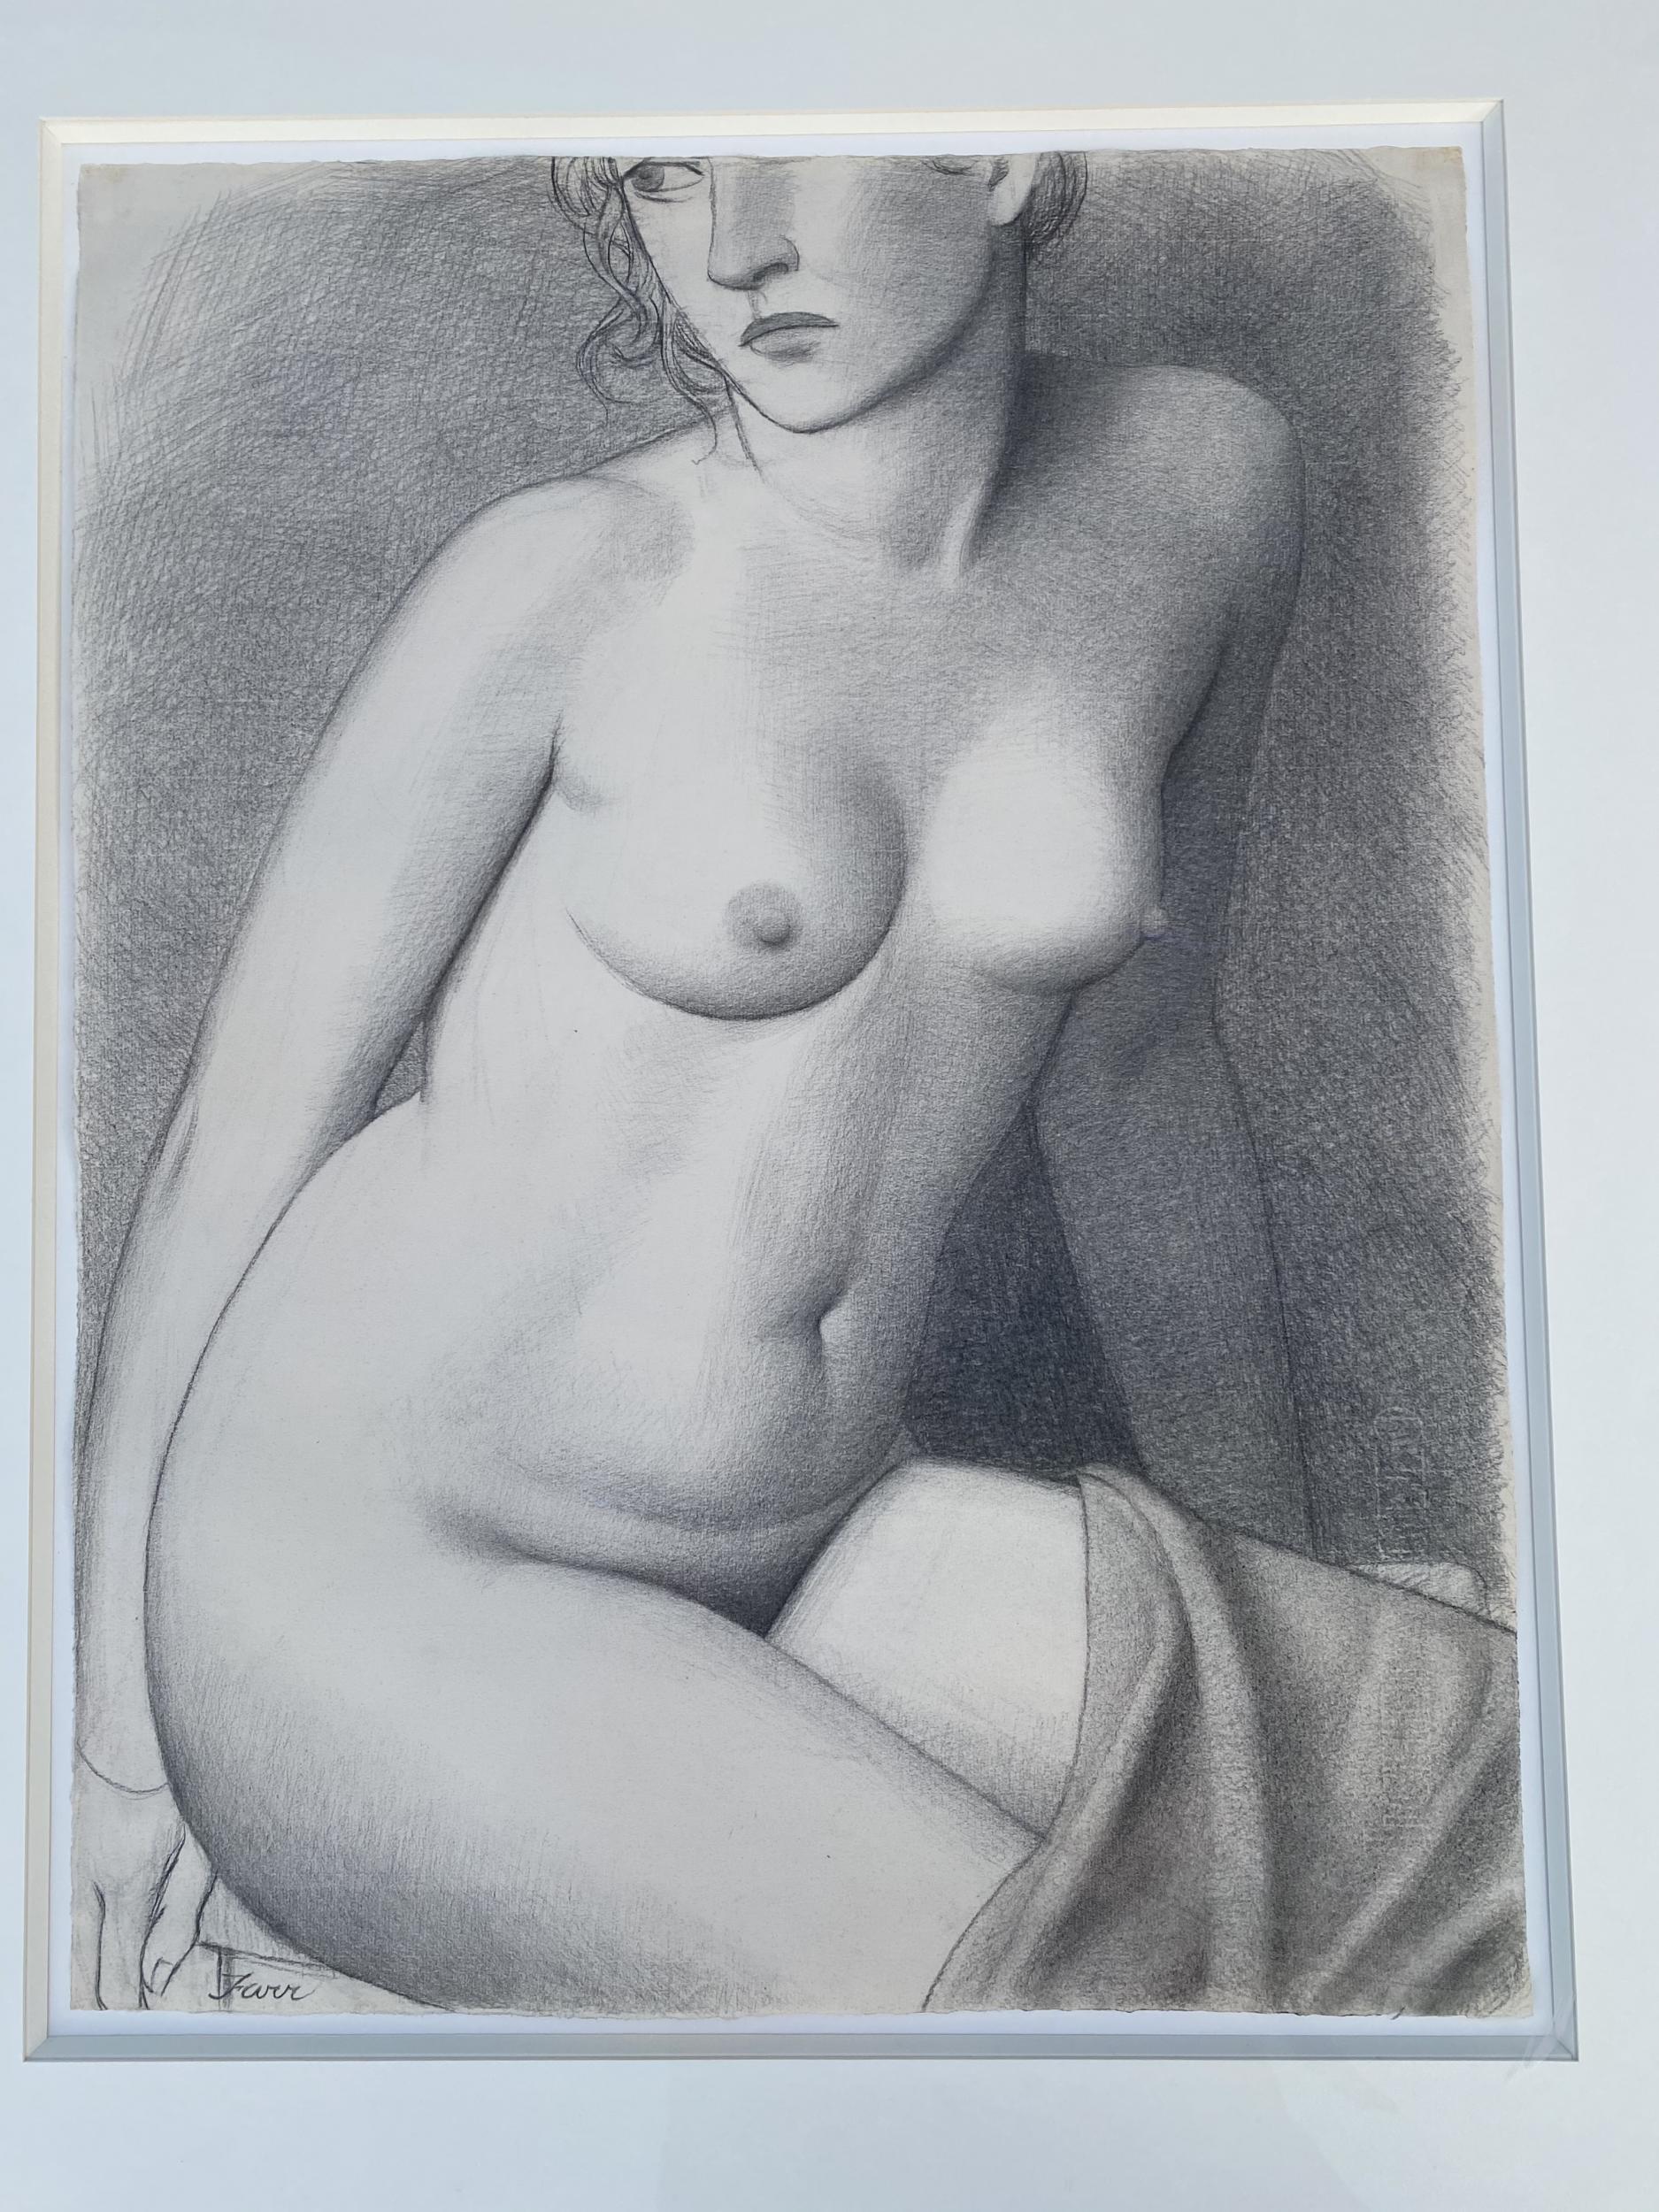 Nude female charcoal signed Jonathan Farr in the original chrome frame. 

circa 1980

Measures: Frame: 32.5